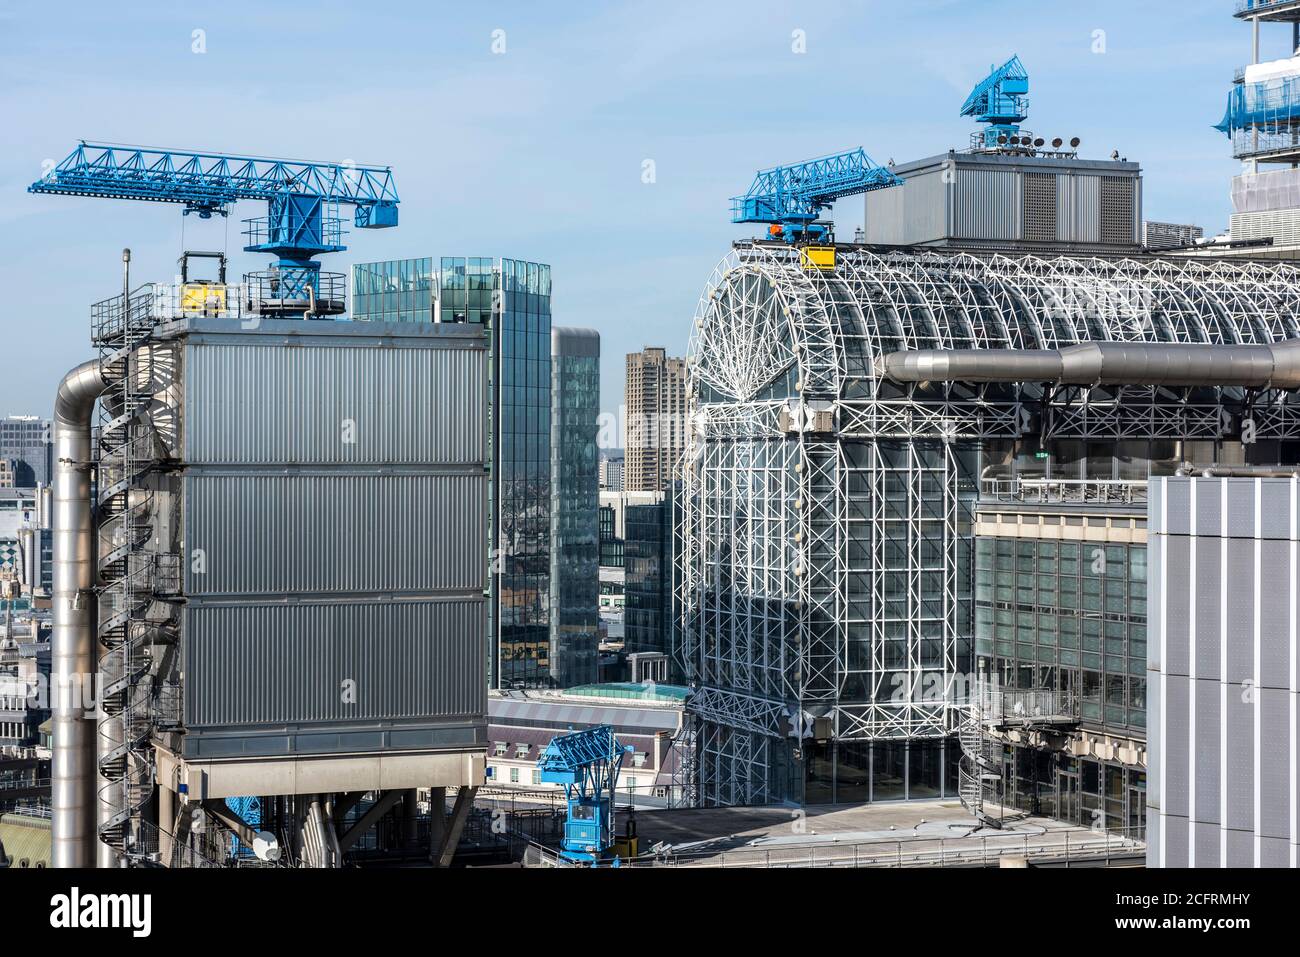 Elevator tower, atrium and blue cleaning cranes from the Scalpel. One of the Barbican towers can be seen in middle of frame. Lloyd's Building, London, Stock Photo